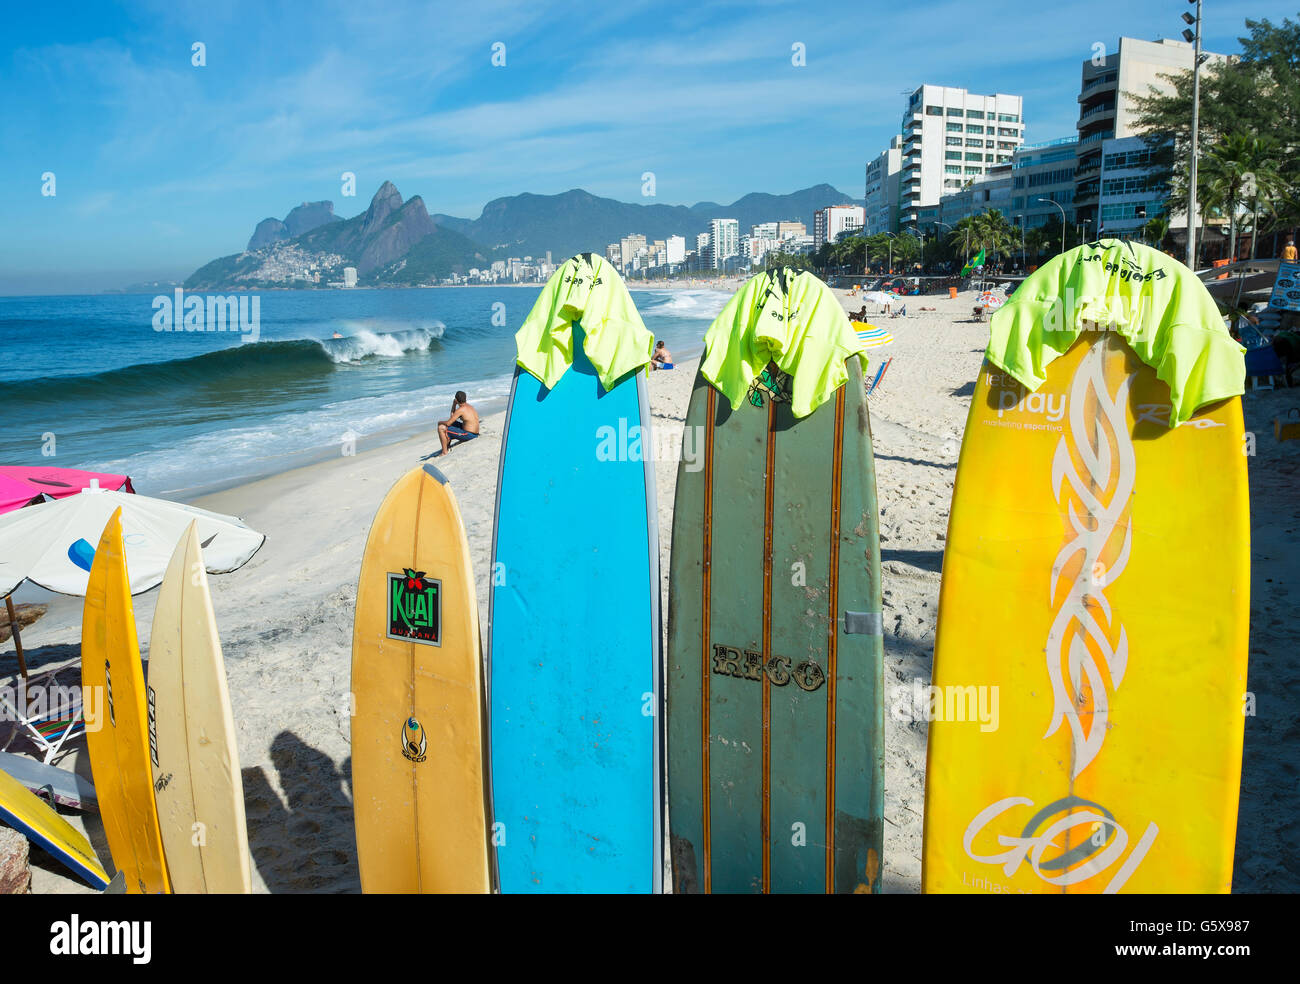 RIO DE JANEIRO - MARCH 30, 2016: Colorful surfboards stand lined up on the beach at Arpoador, a popular surf destination. Stock Photo